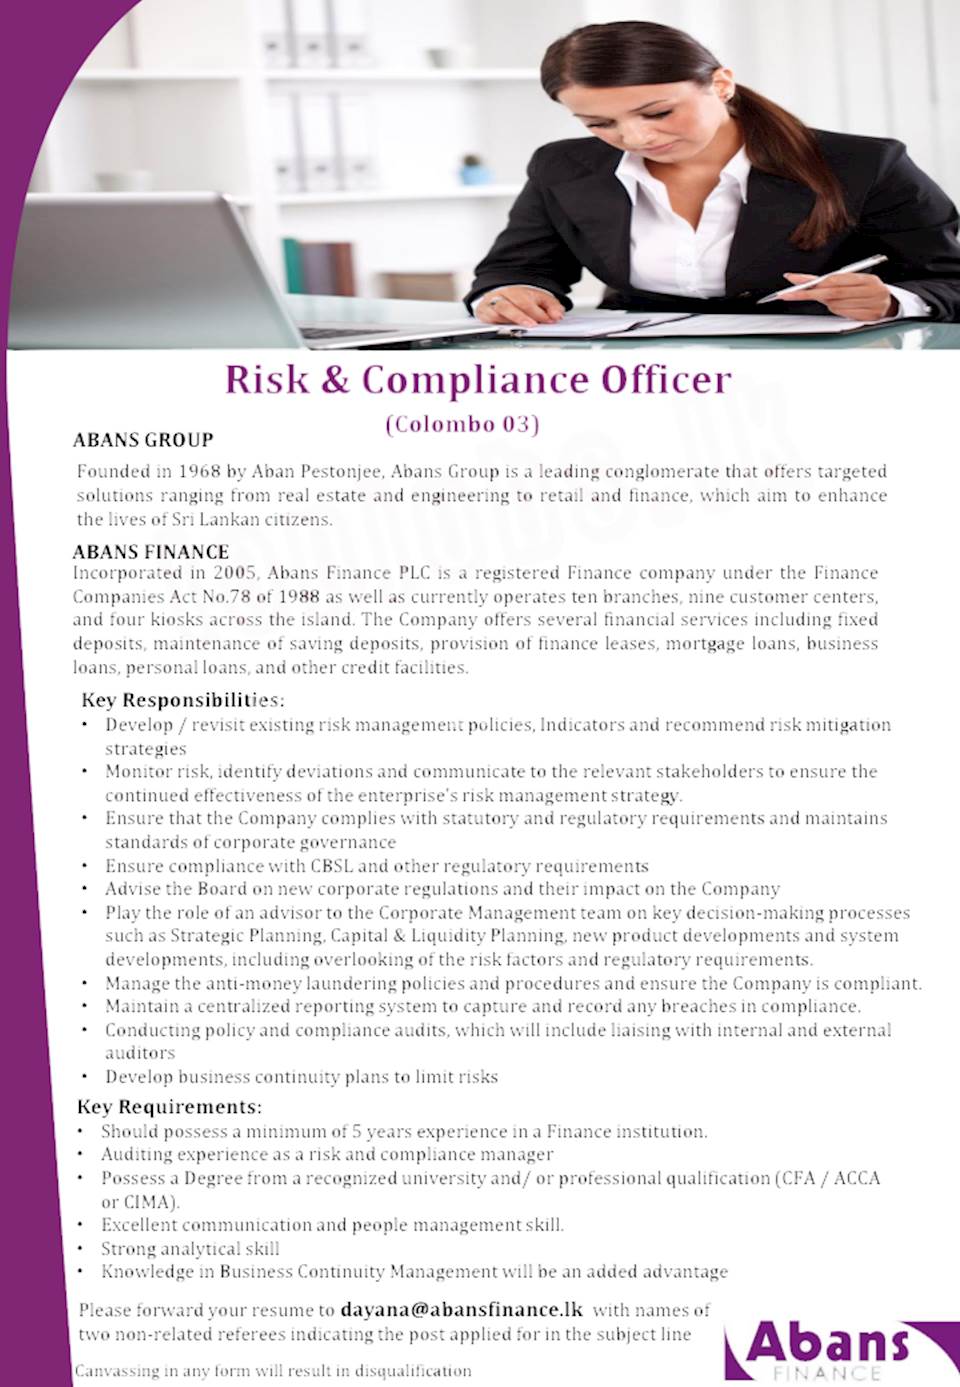 Risk and Compliance Officer